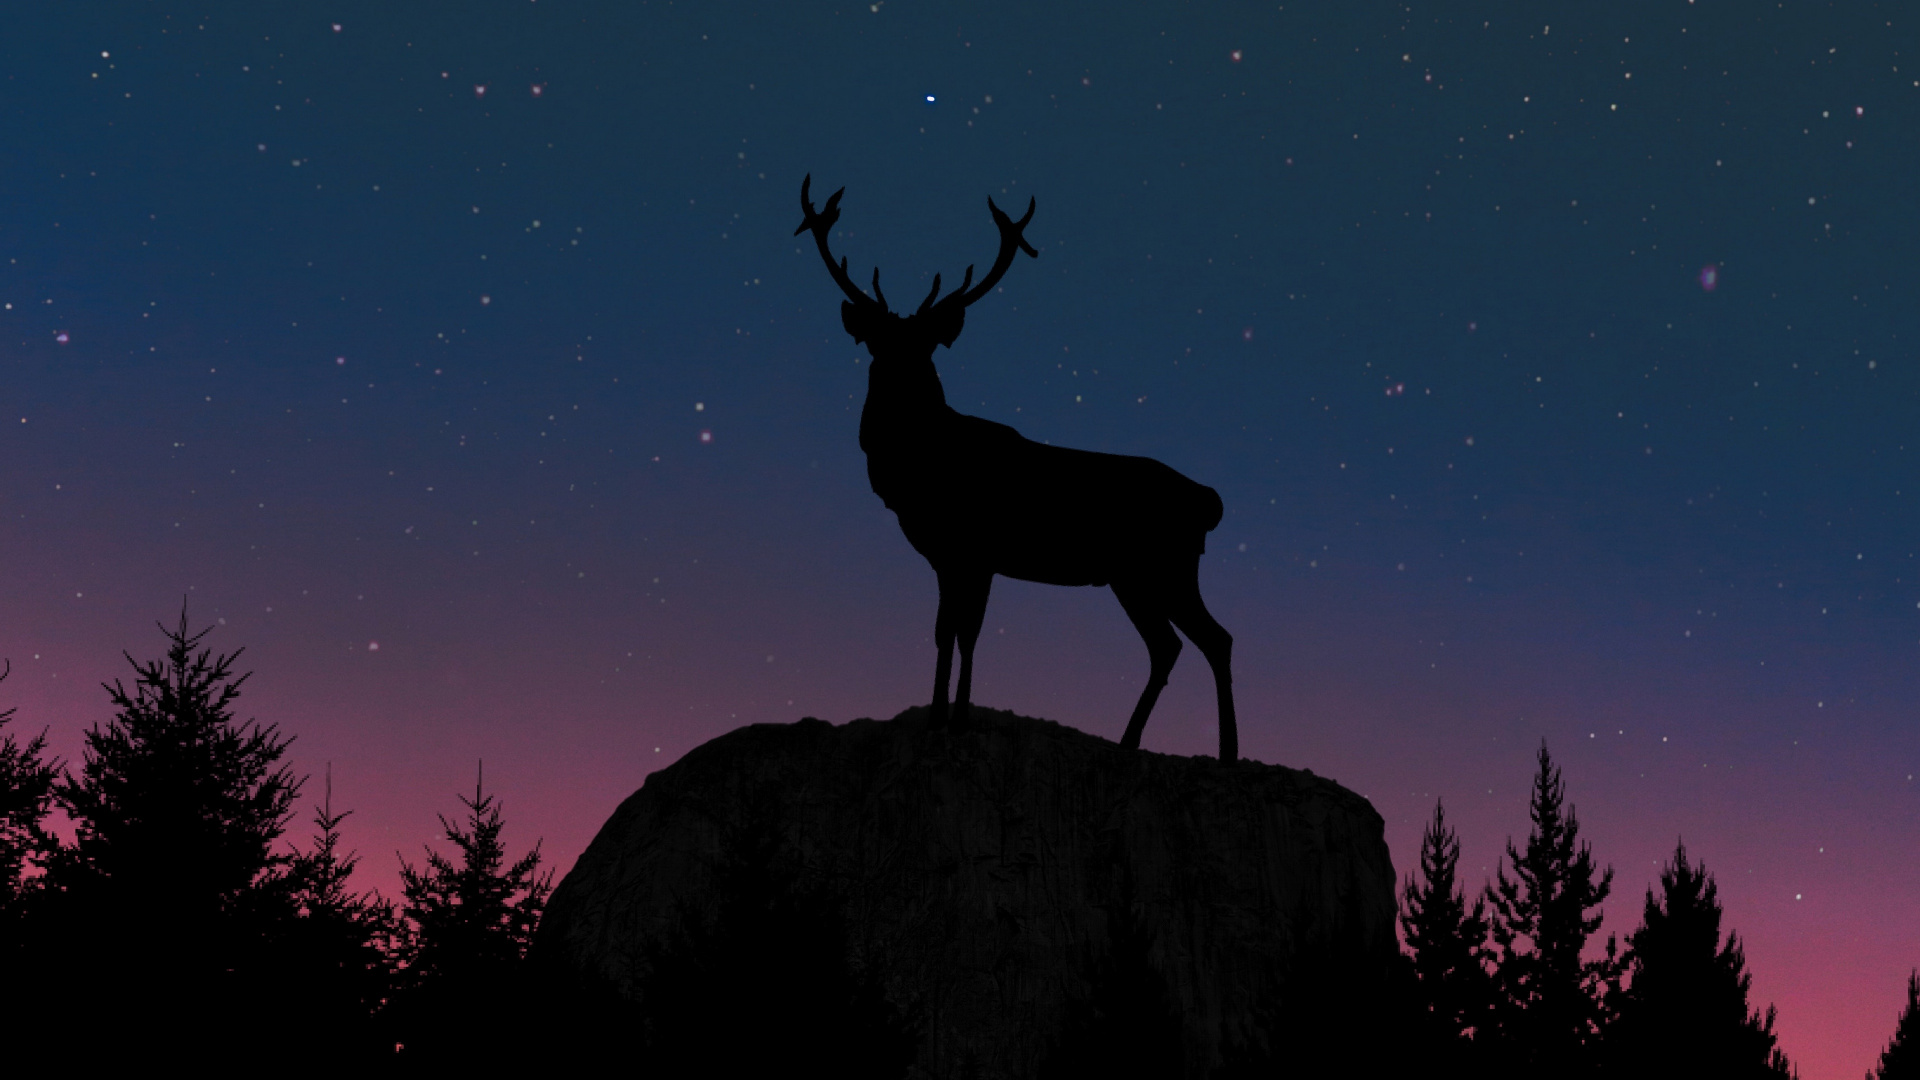 Brown Deer Standing on Rock During Night Time. Wallpaper in 1920x1080 Resolution